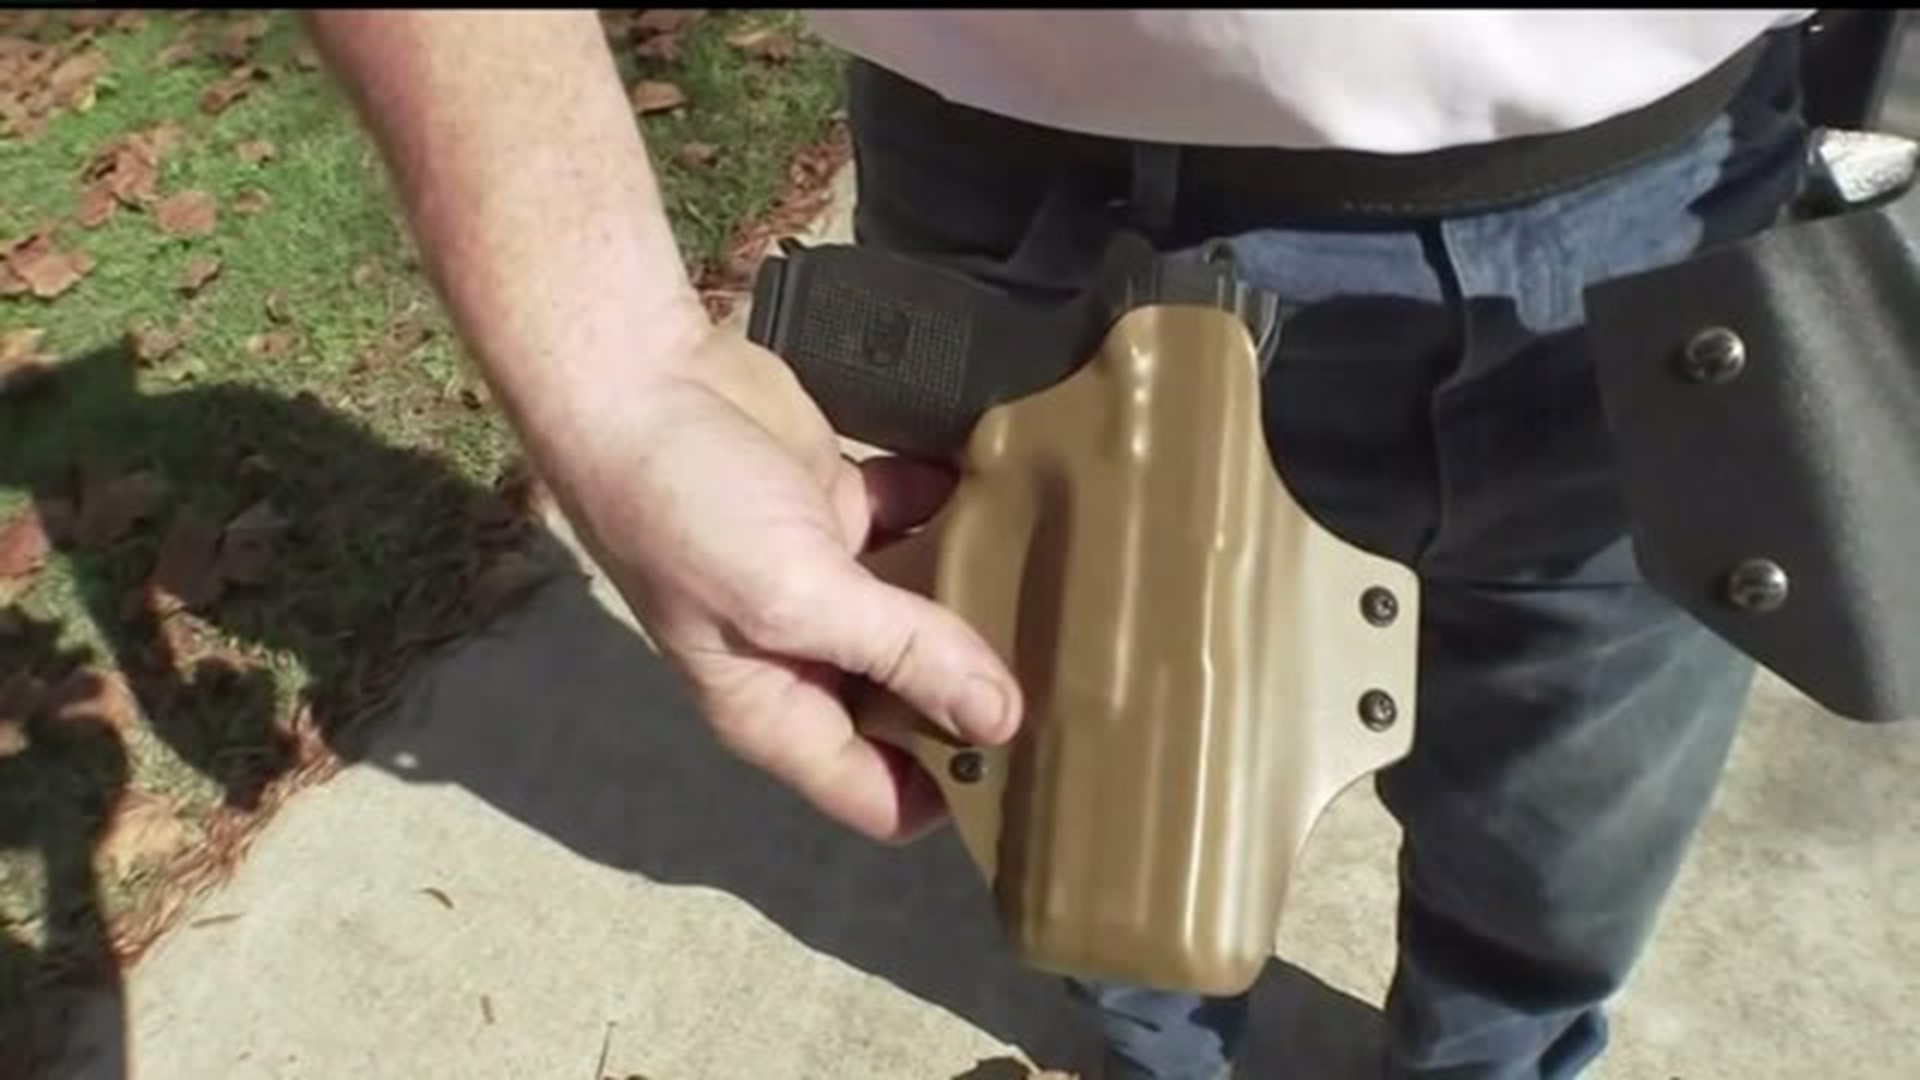 Texas initiates open carry law